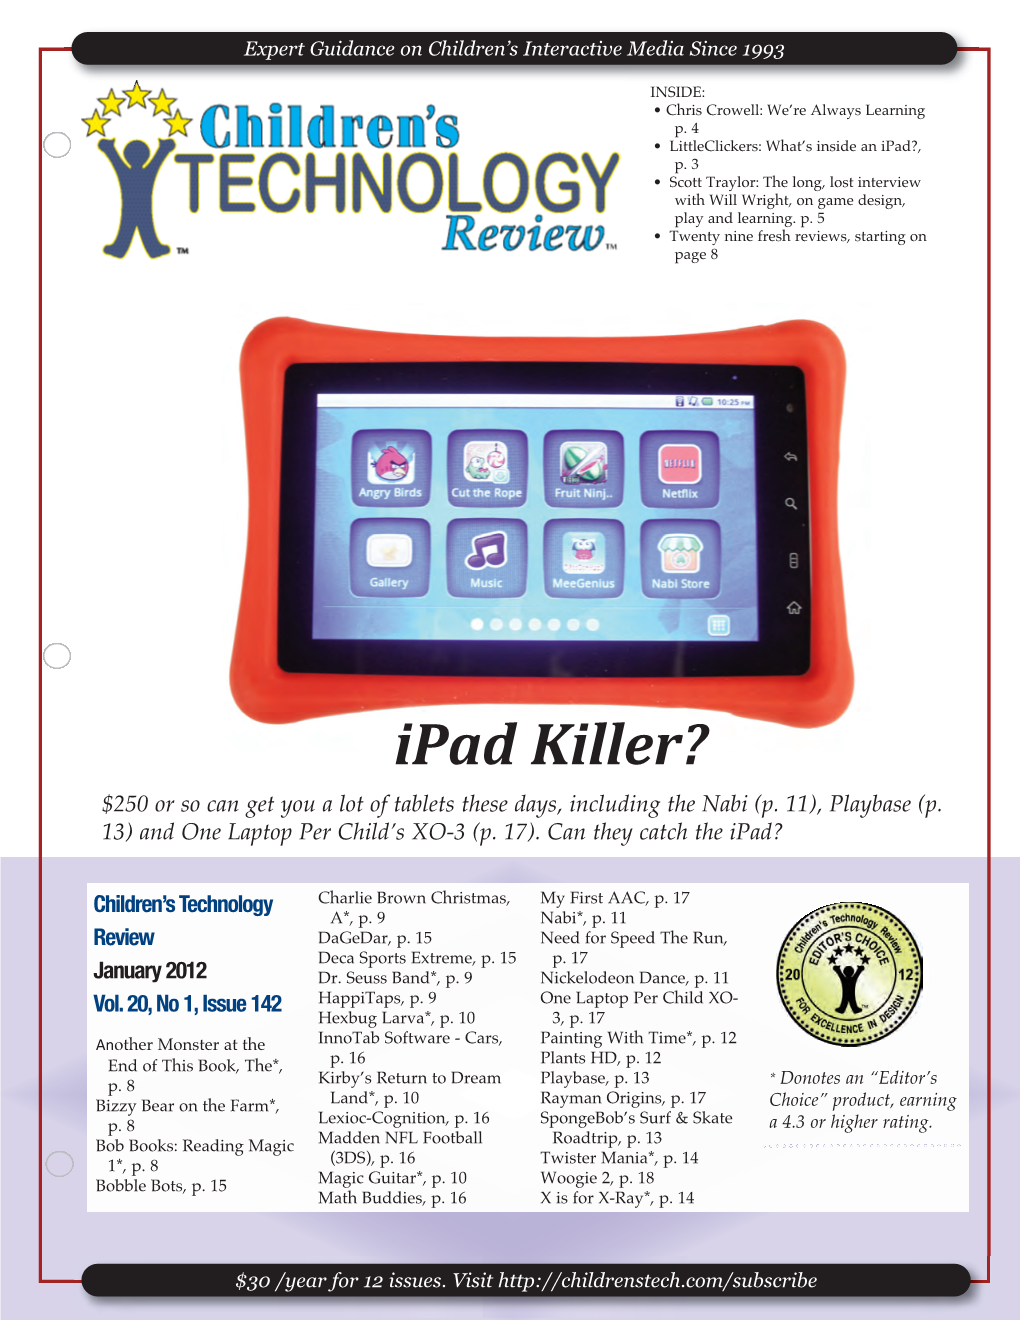 Ipad Killer? $250 Or So Can Get You a Lot of Tablets These Days, Including the Nabi (P